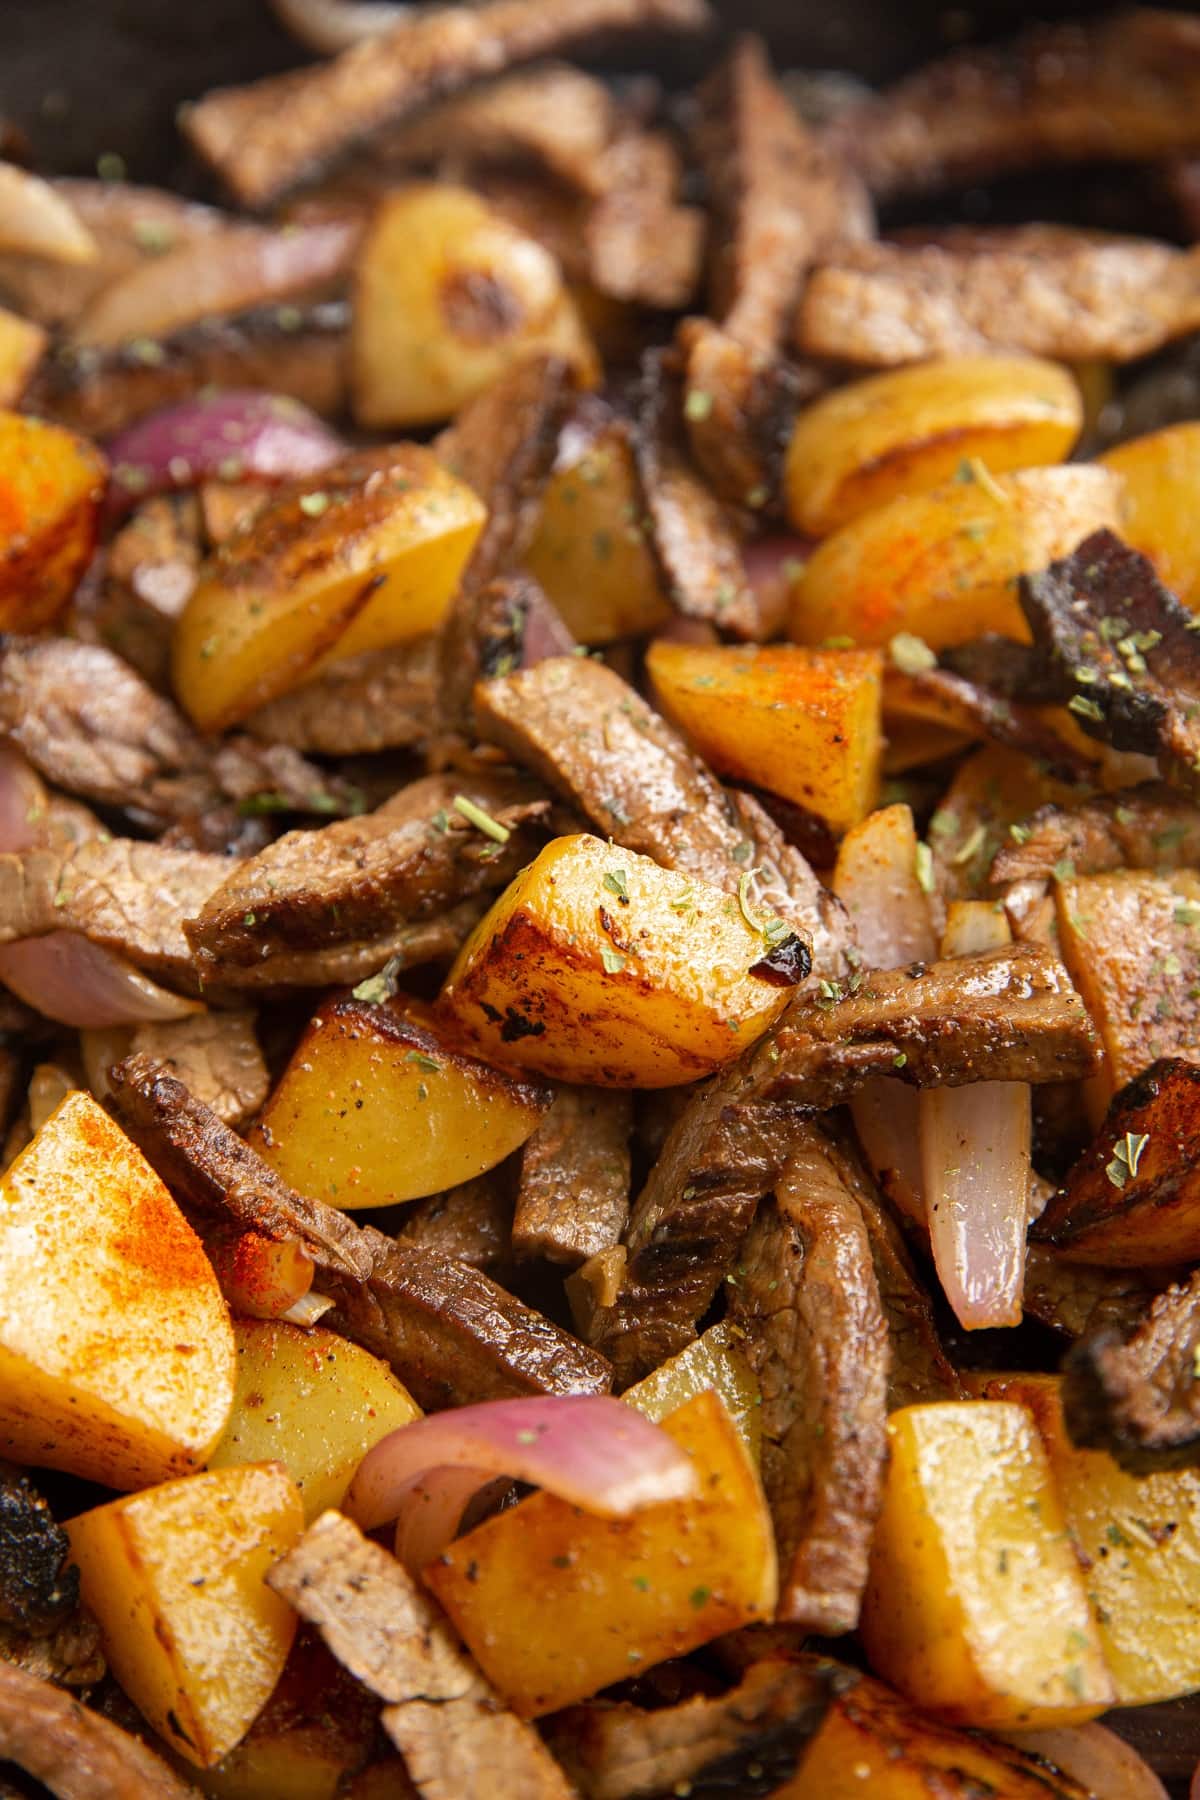 Steak and Sweet Potato Skillet with Peppers - The Roasted Root